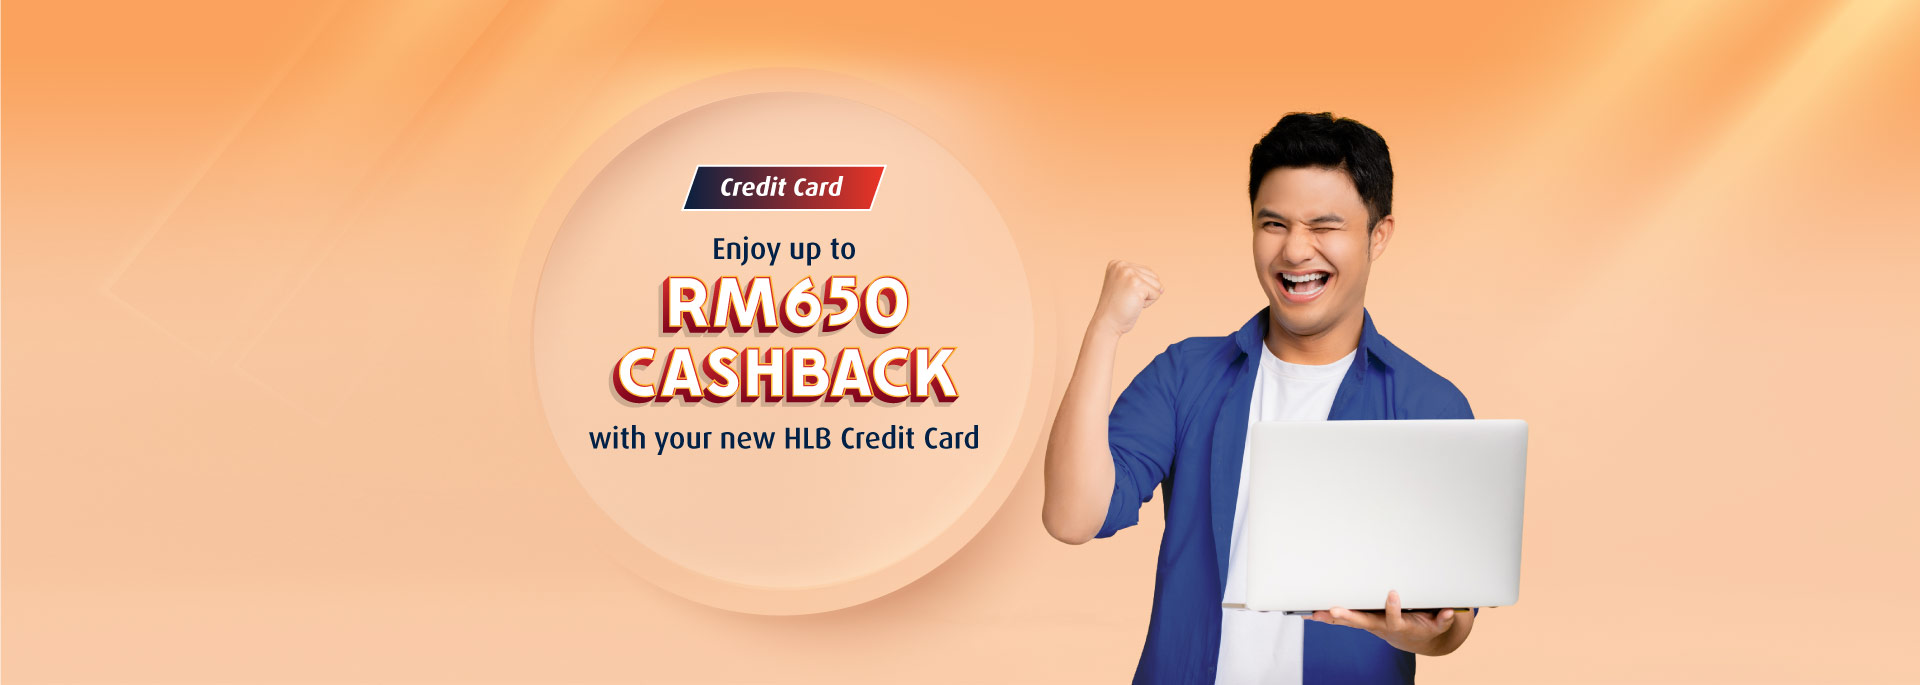 Check out your Shopee cart this CNY with your new HLB Credit Card to enjoy more cashback!